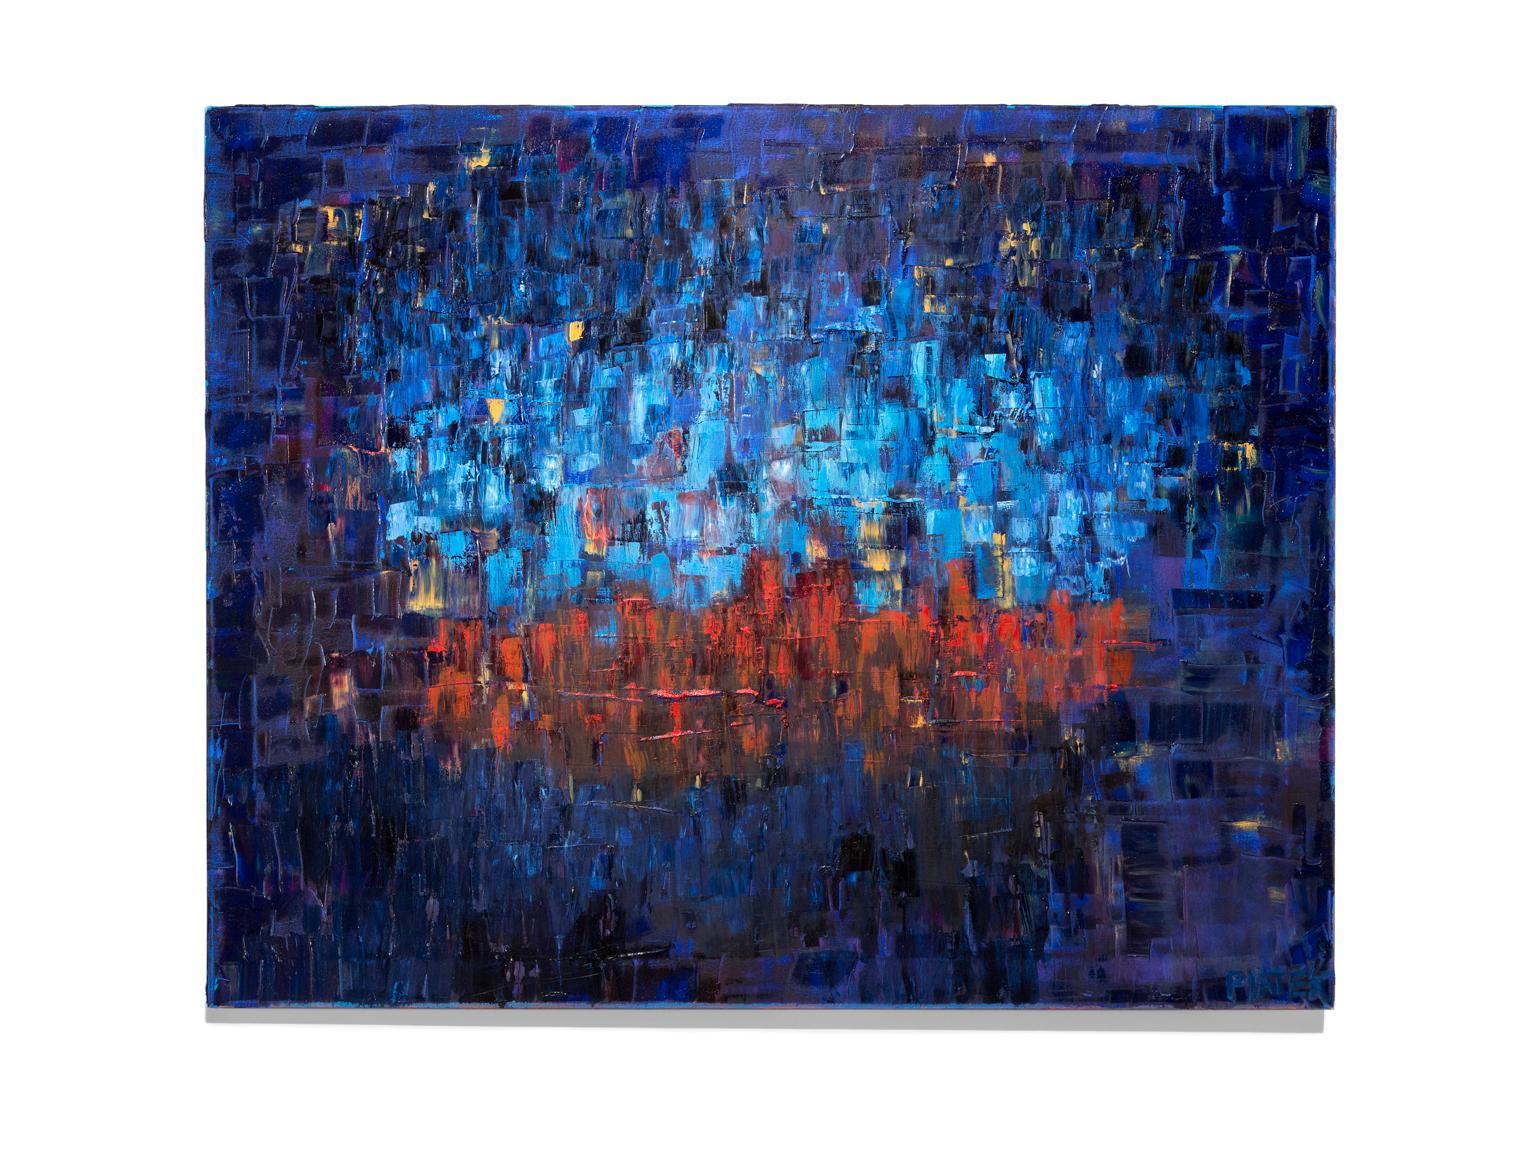 Robert Piatek Abstract Painting - "Beyond the Wall"  Oil on Canvas, Brilliant Blues, Red, Abstract Expressionist